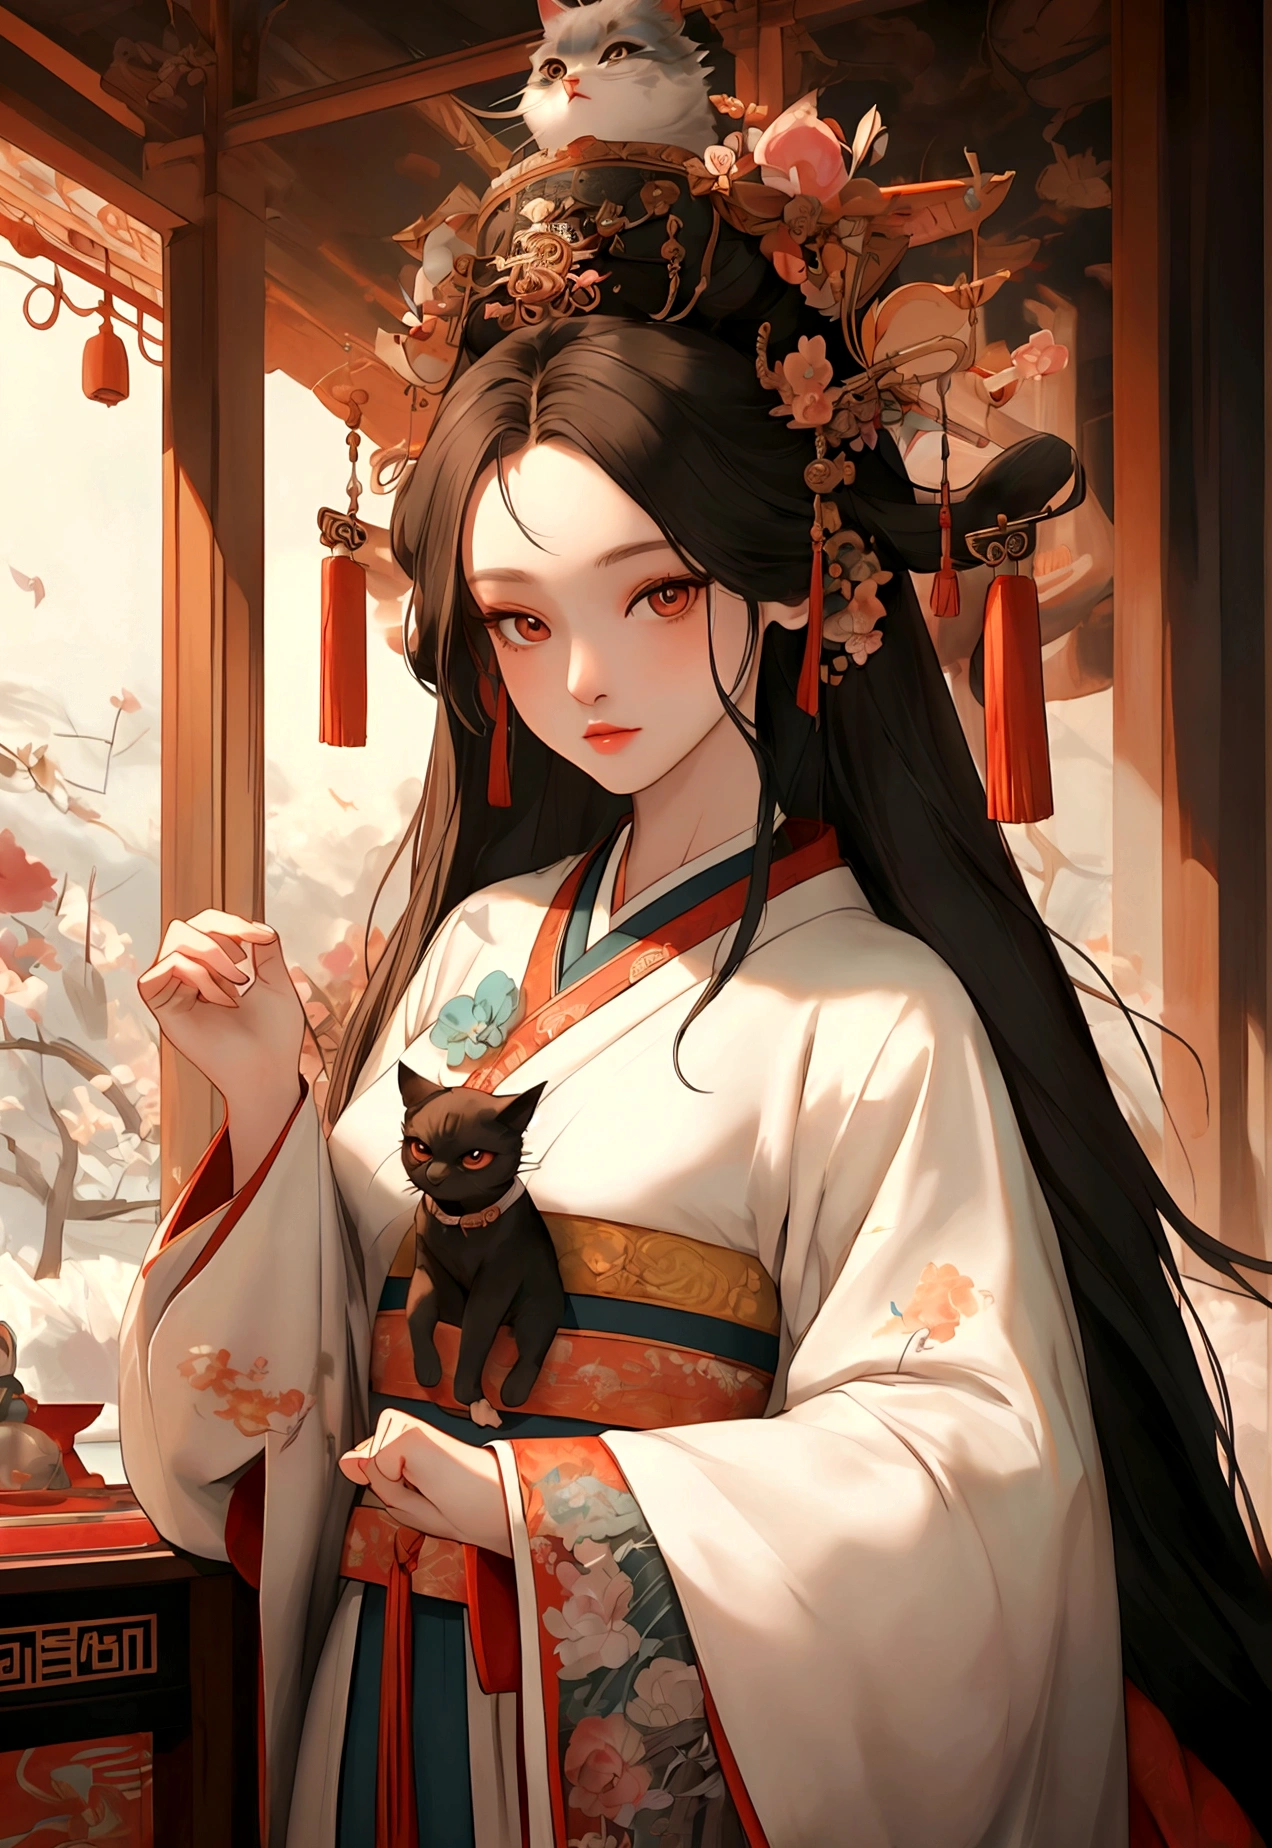 ((Masterpiece)), (Best Quality), (Cinematic),(highly accurate drawing in every detail)(extremely precise representation)half_body_portrait,ancient asia vibe, a stunning hanfu oriental cat(with all cat specific bodyparts) dressed in georgeous hanfu dress with sacred geometric patterns and hair plus hanfu headpiece.big eyes, high quality linework,